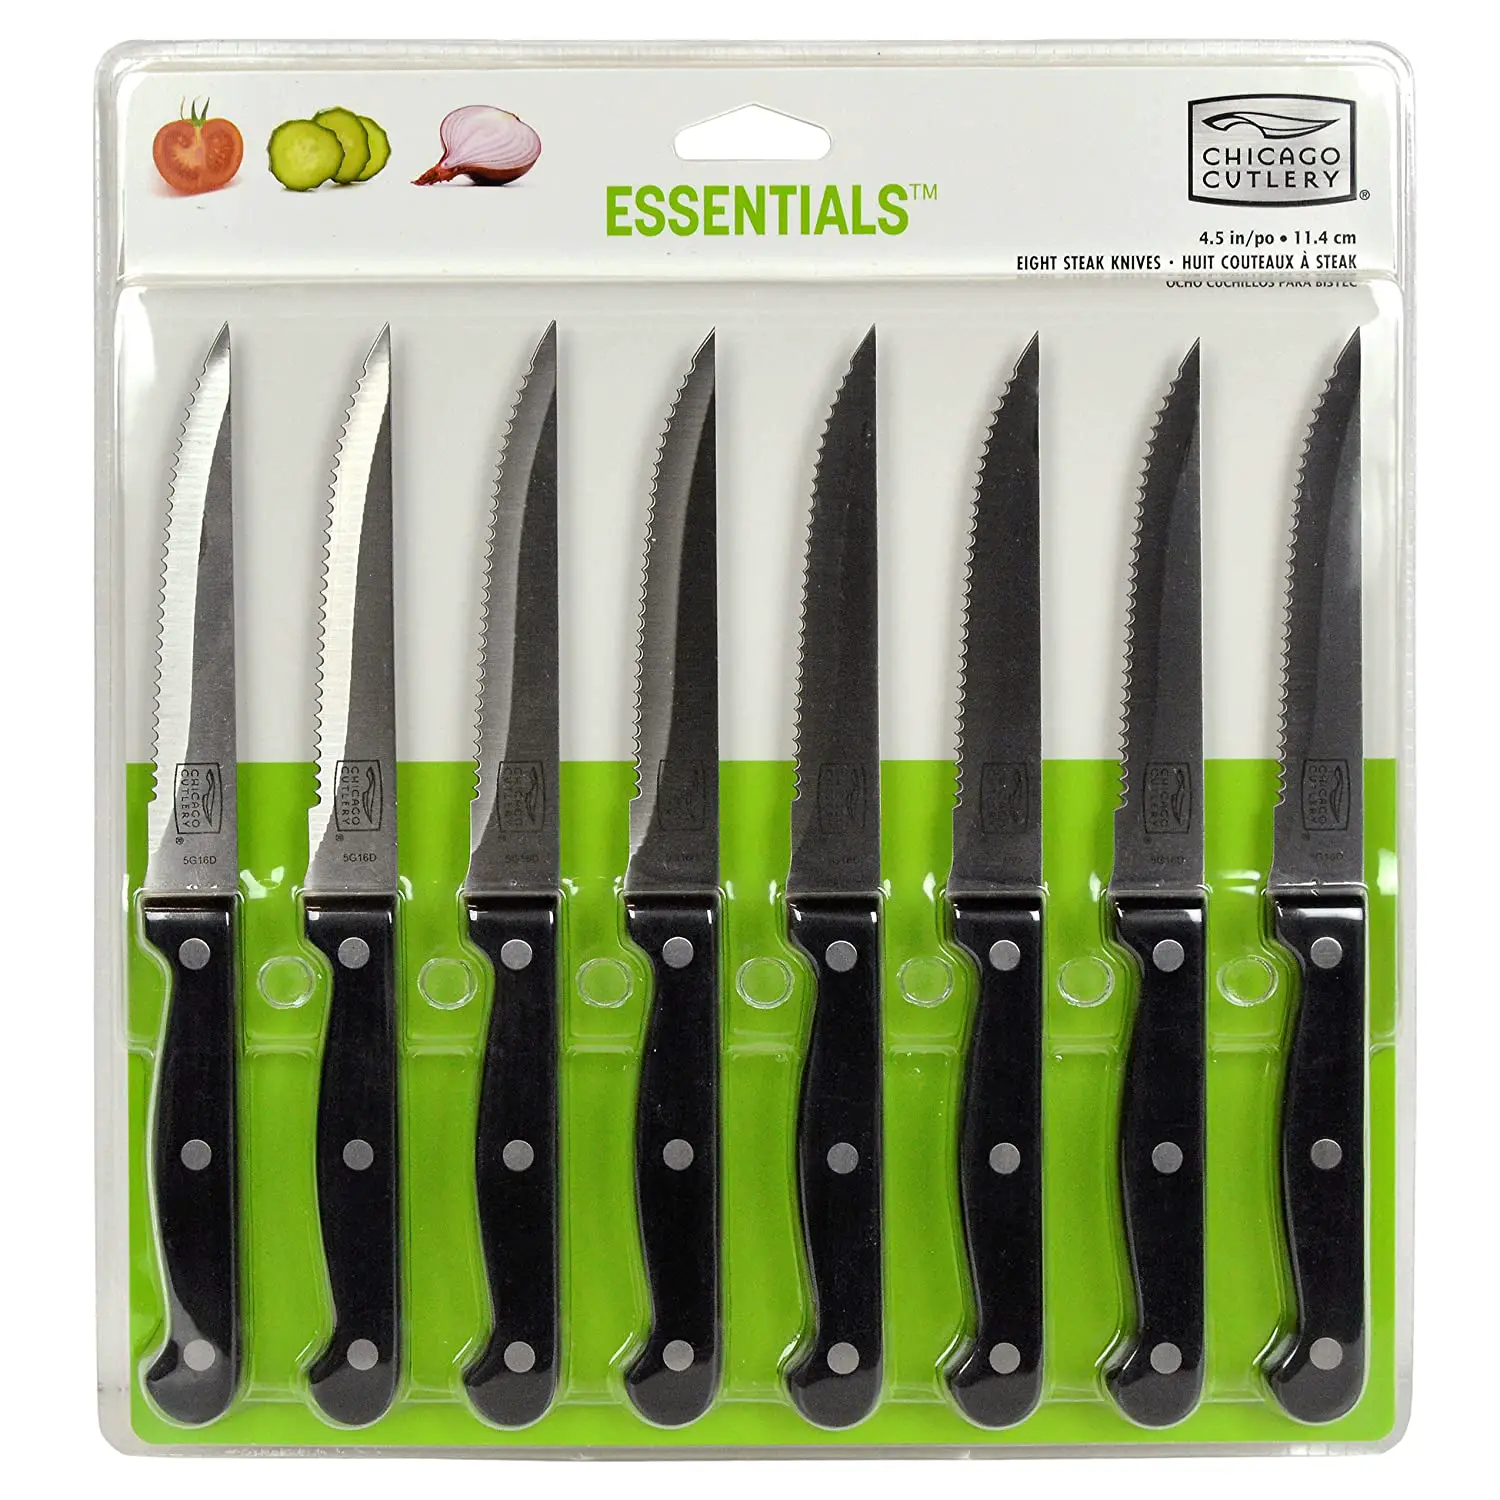 Amazon.com: Chicago Cutlery 8pc Essentials Serrated Stainless Steel ...